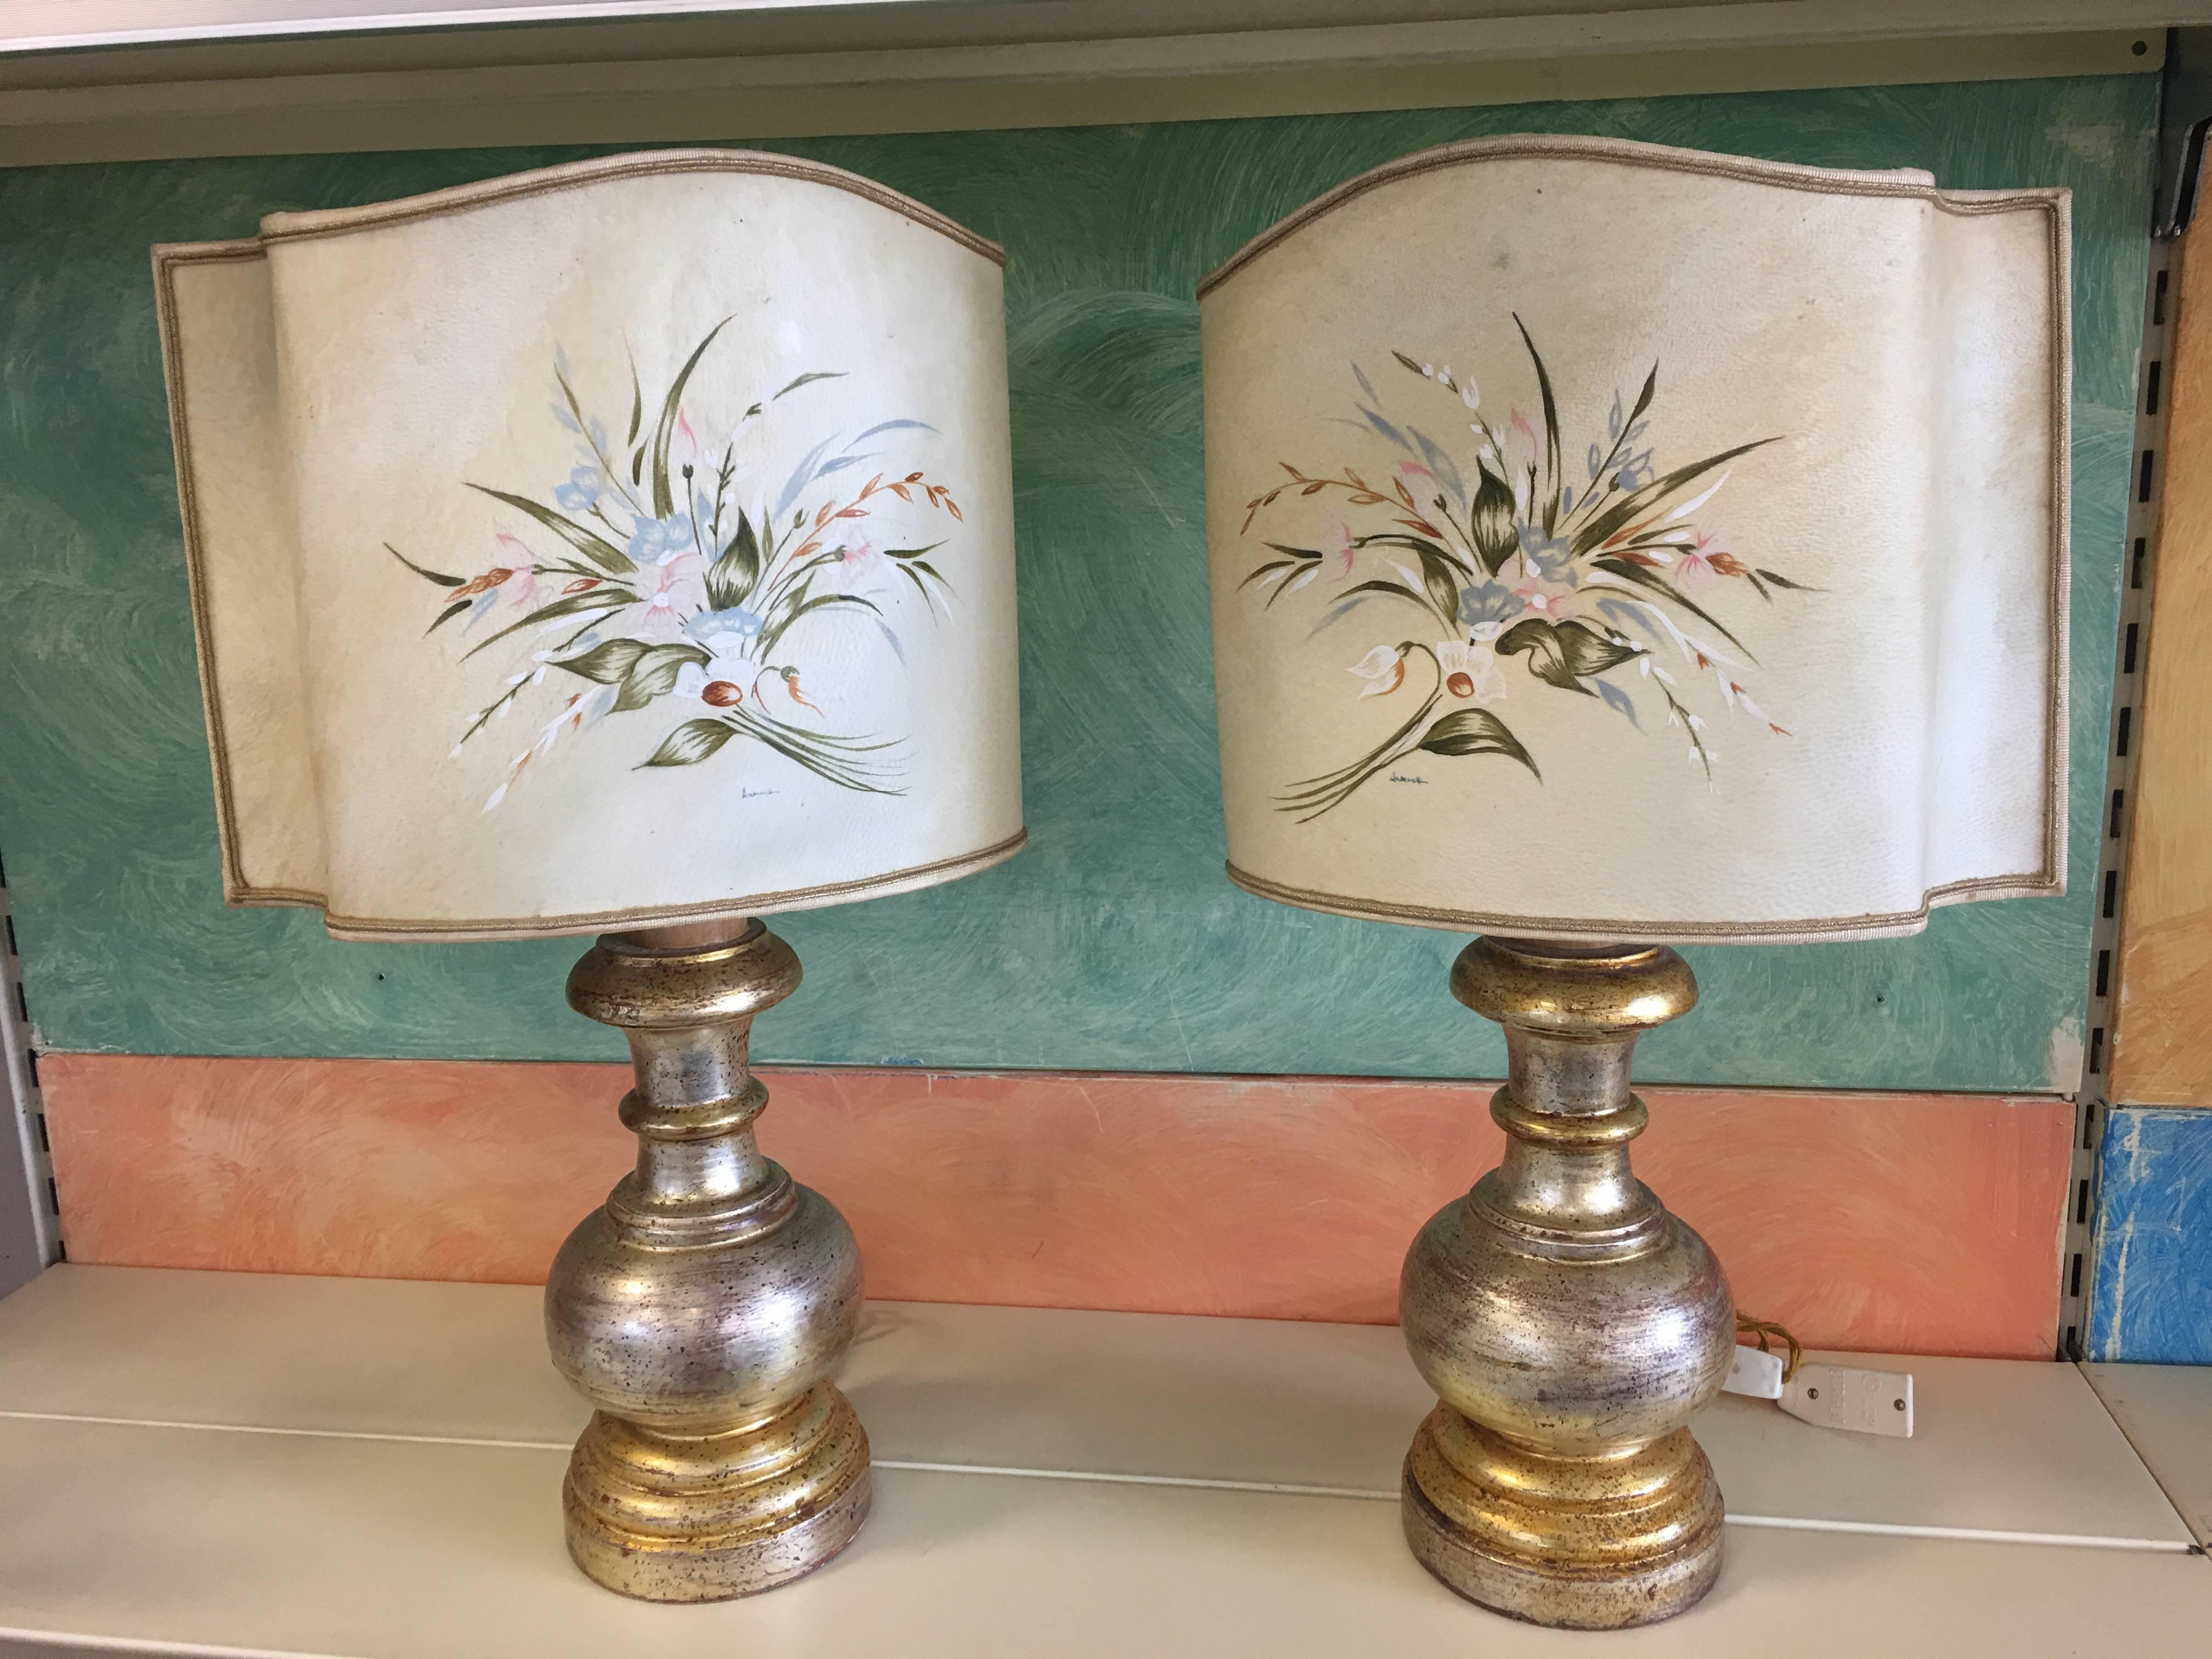 Beautiful Italian table lamps in Renaissance style. The abat-jours are hand-painted but the artist was not recognized.

Complimentary shipping!